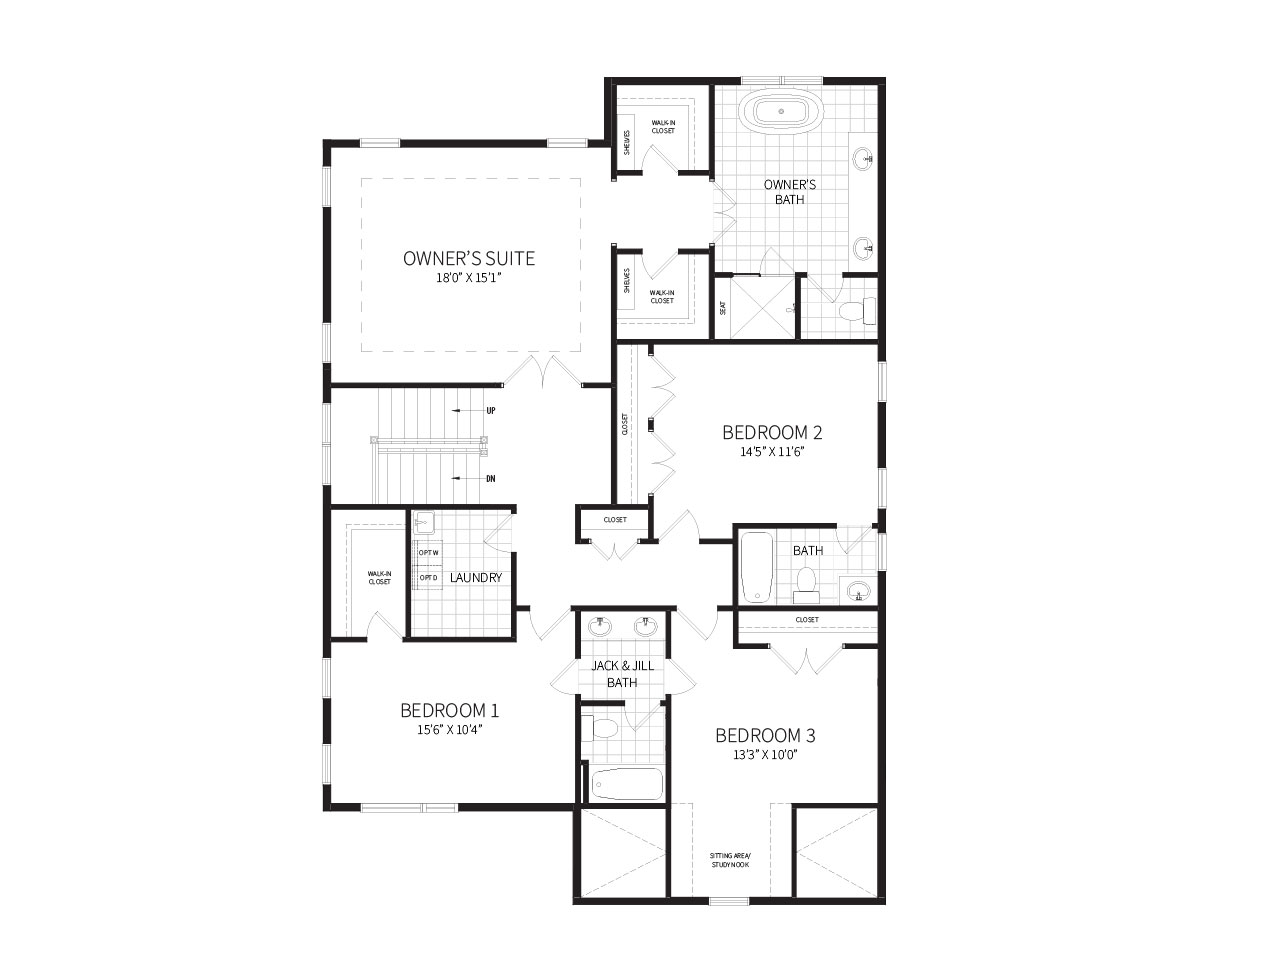 The second floor plan of the Hendry model, featuring a private owner's suite encompassing the entire rear of the home.